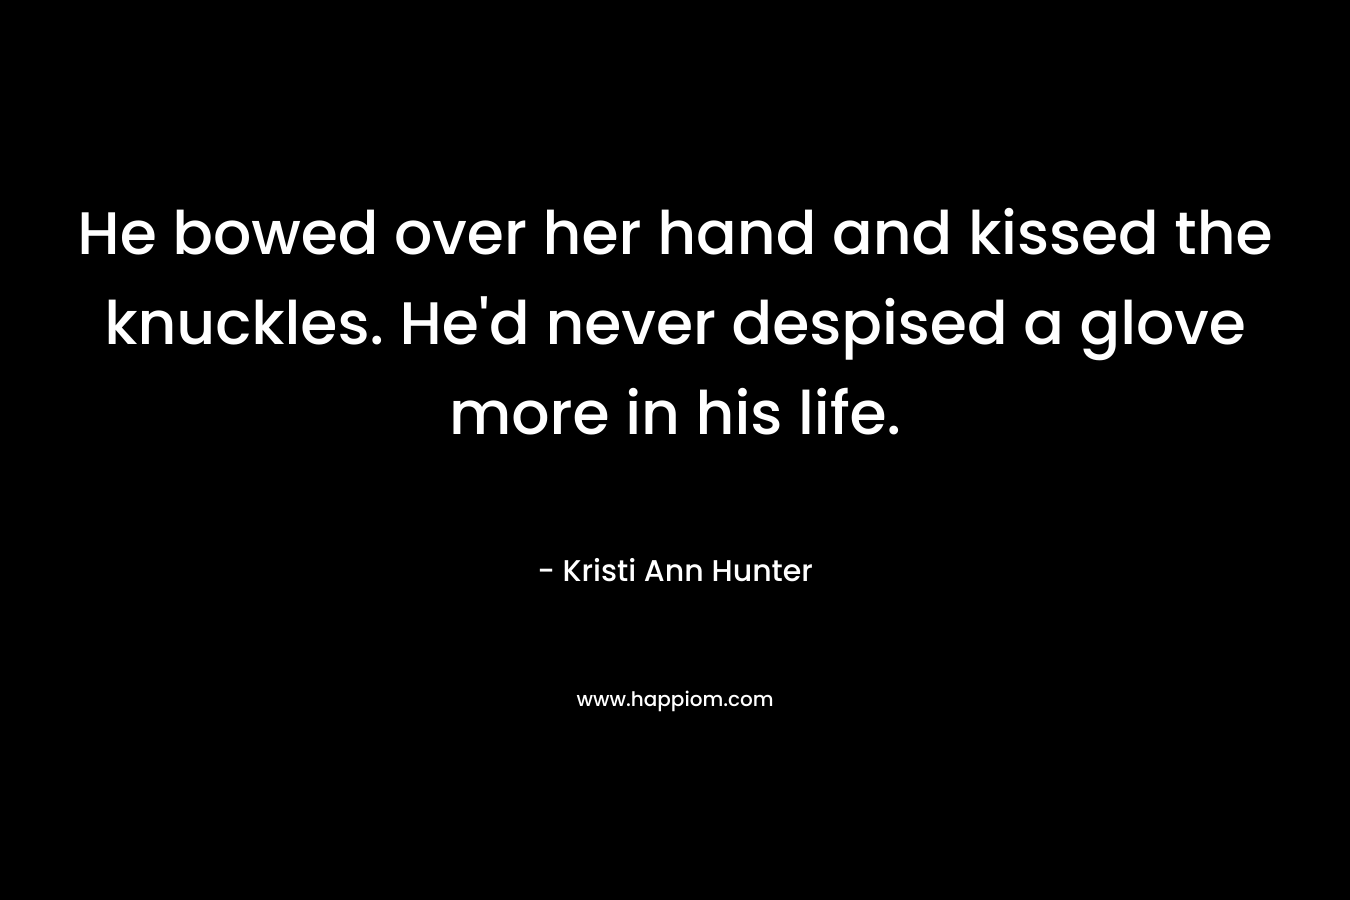 He bowed over her hand and kissed the knuckles. He’d never despised a glove more in his life. – Kristi Ann Hunter